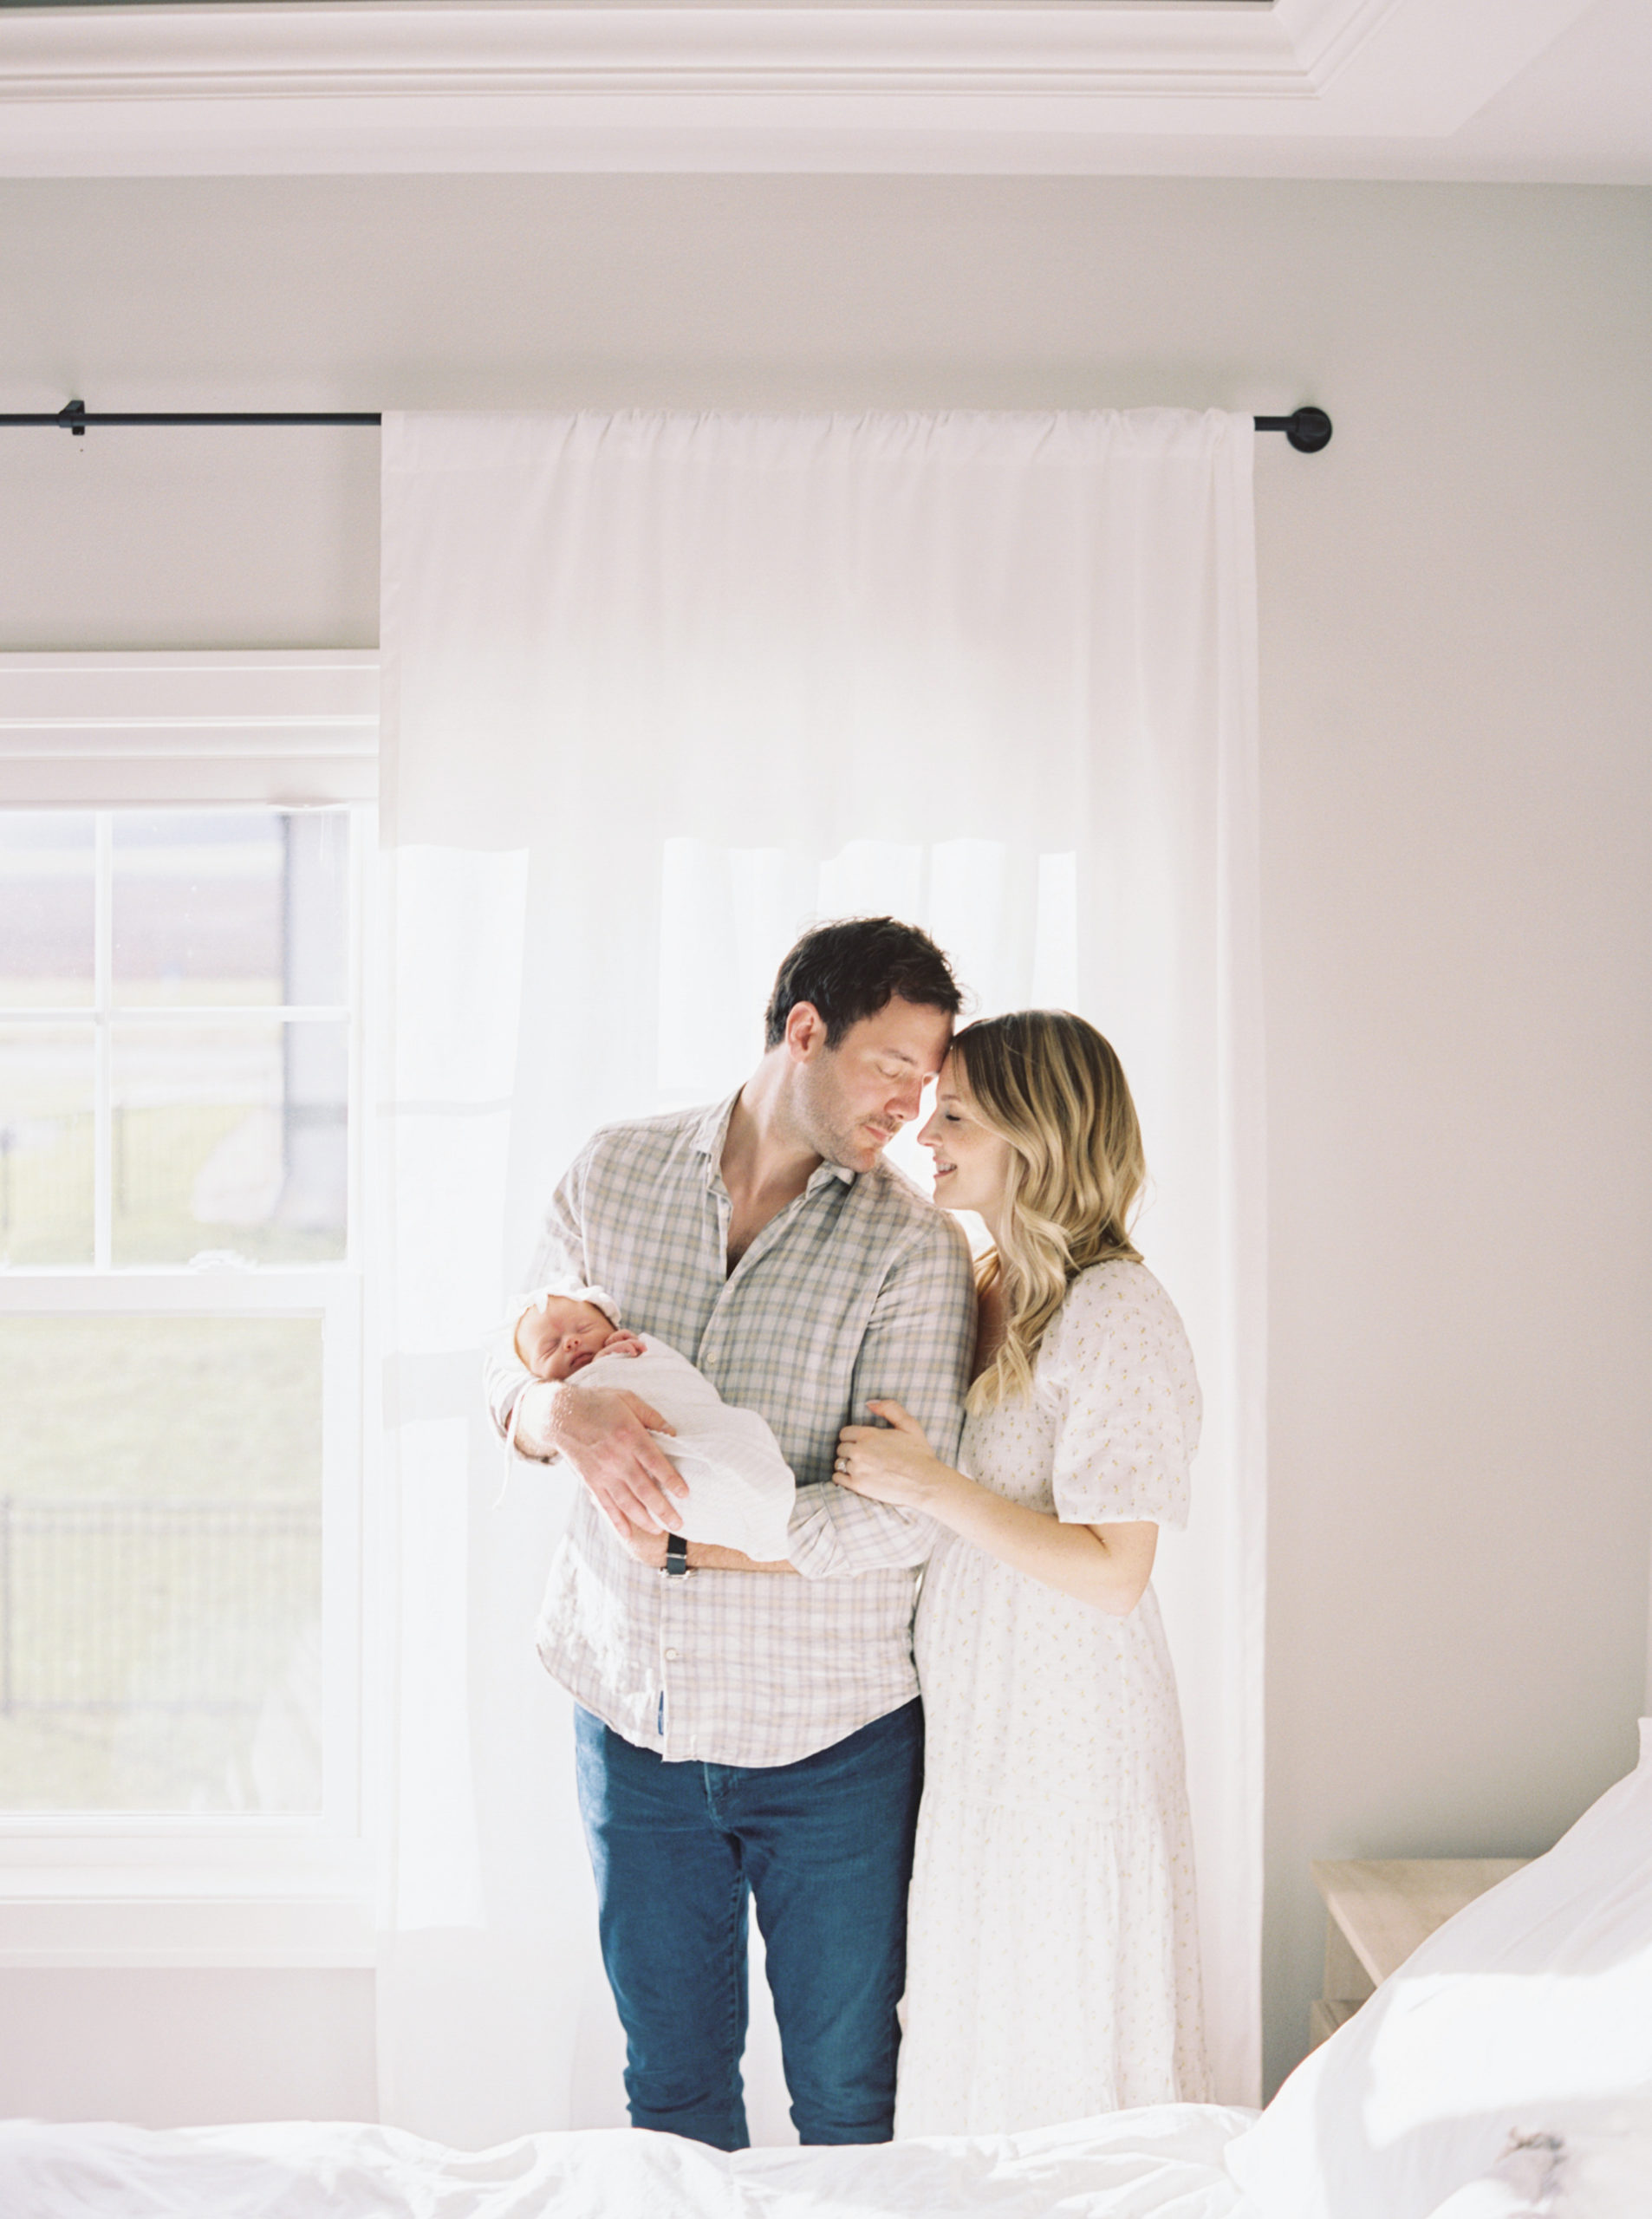 Mother and Father cuddling baby in a beautiful, bright bedroom